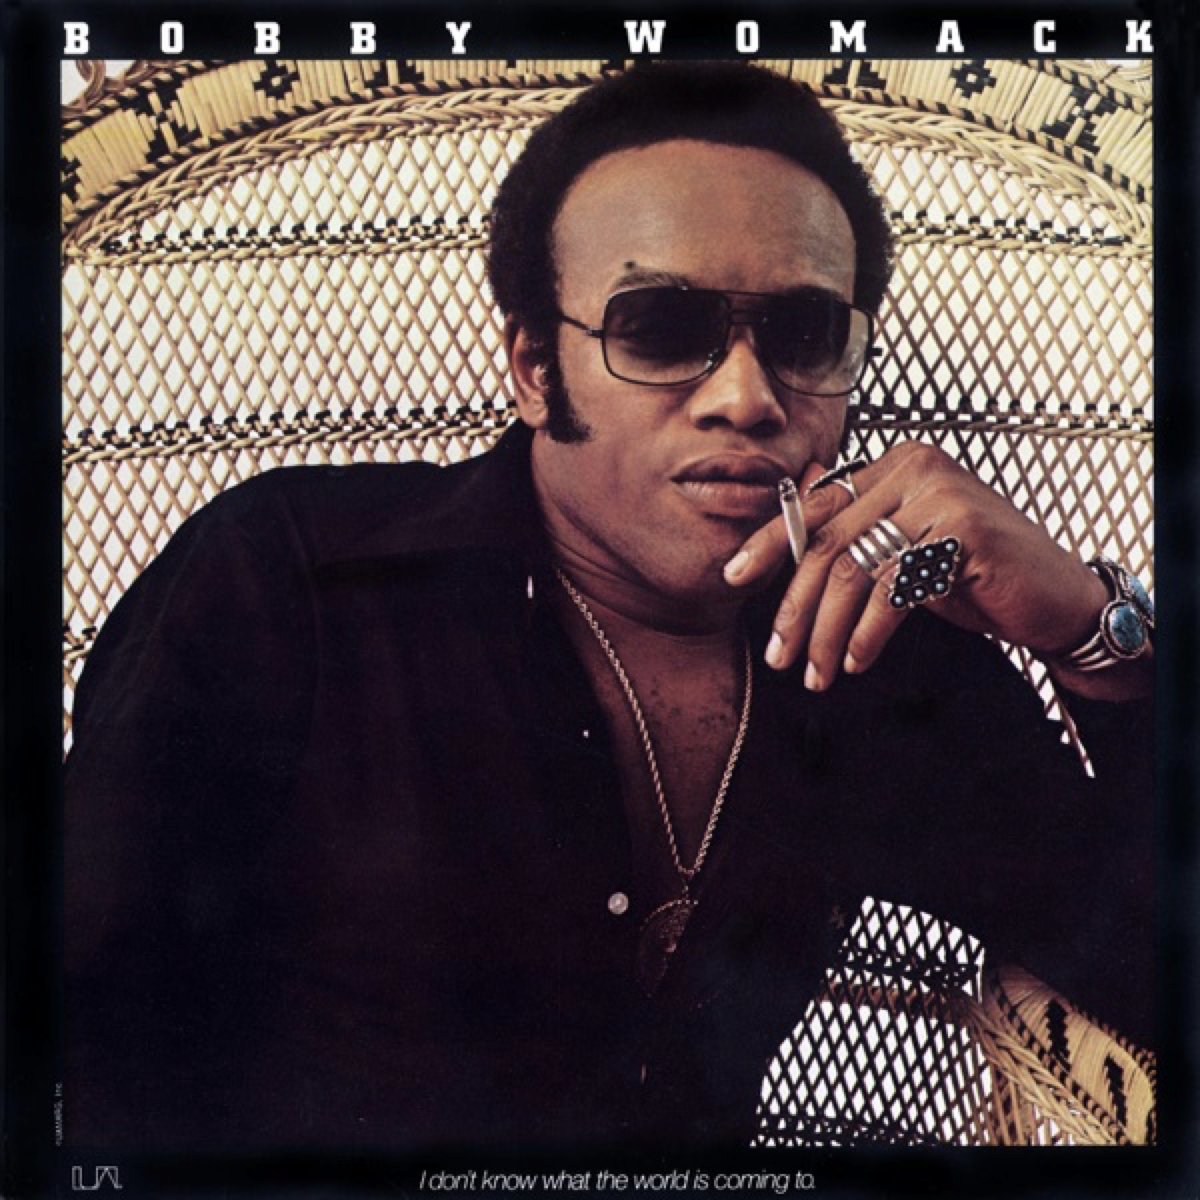 Bobby Womack & Bill Withers - It's All Over Now (Album: I Don't Know What The World Is Coming To) https://t.co/LGvMczpkAv